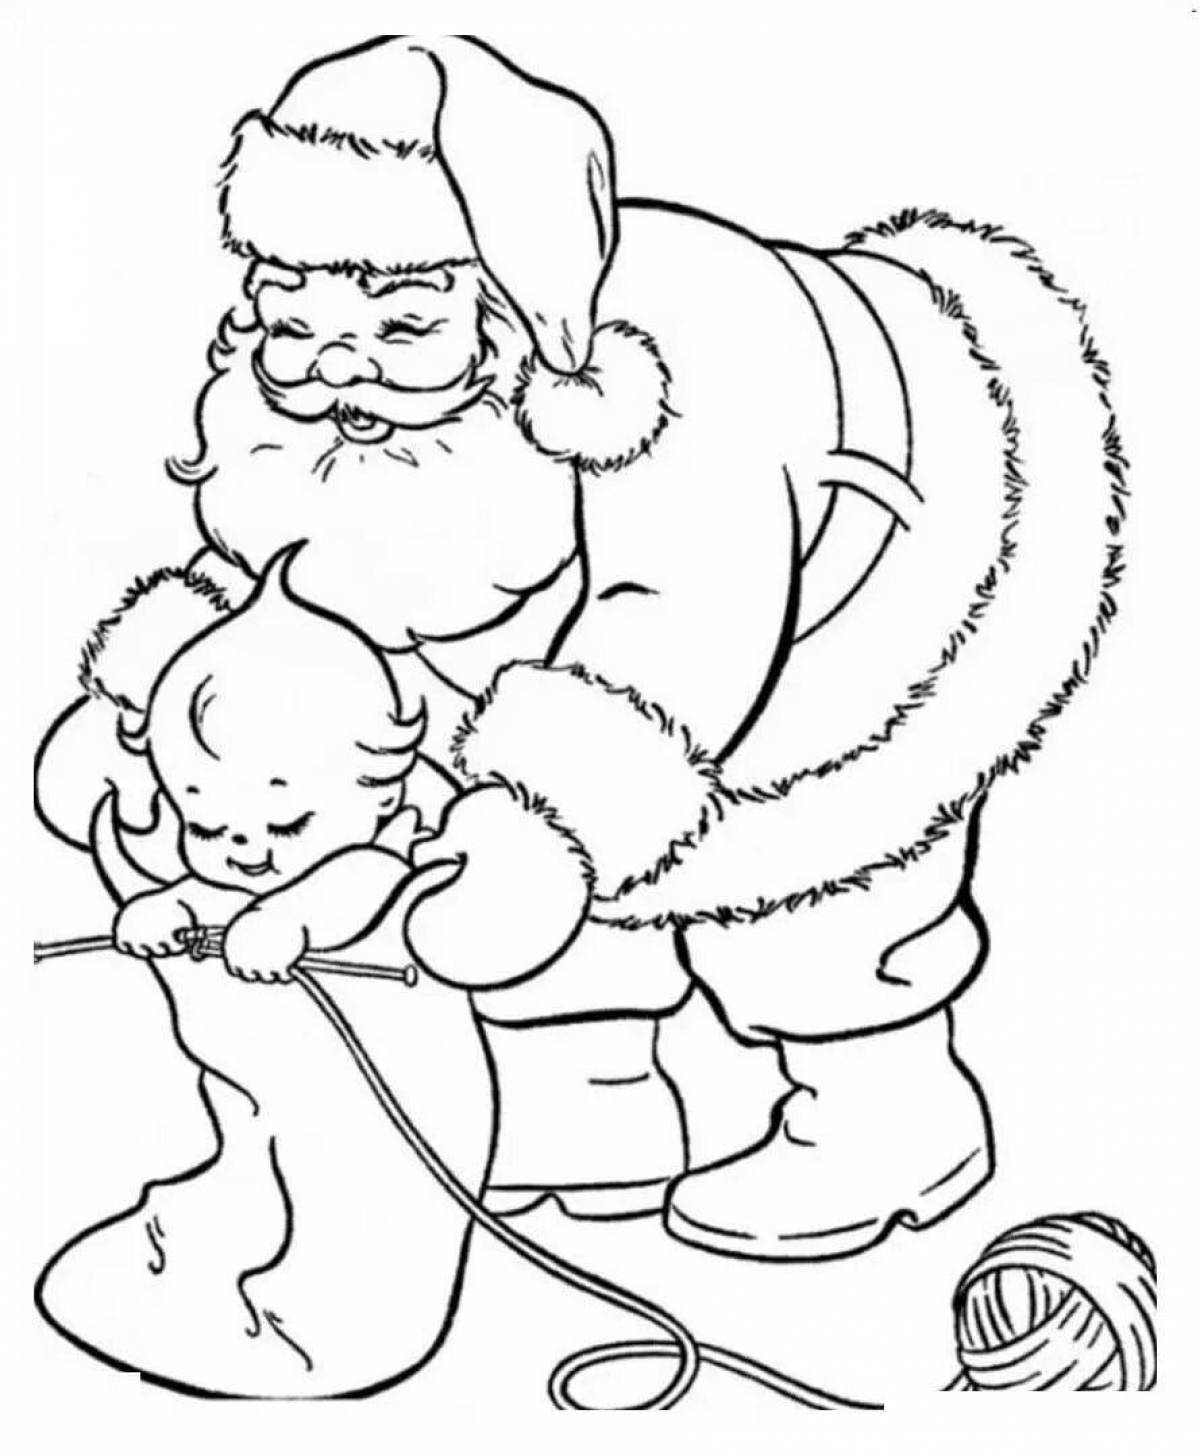 Large frost coloring book for kids